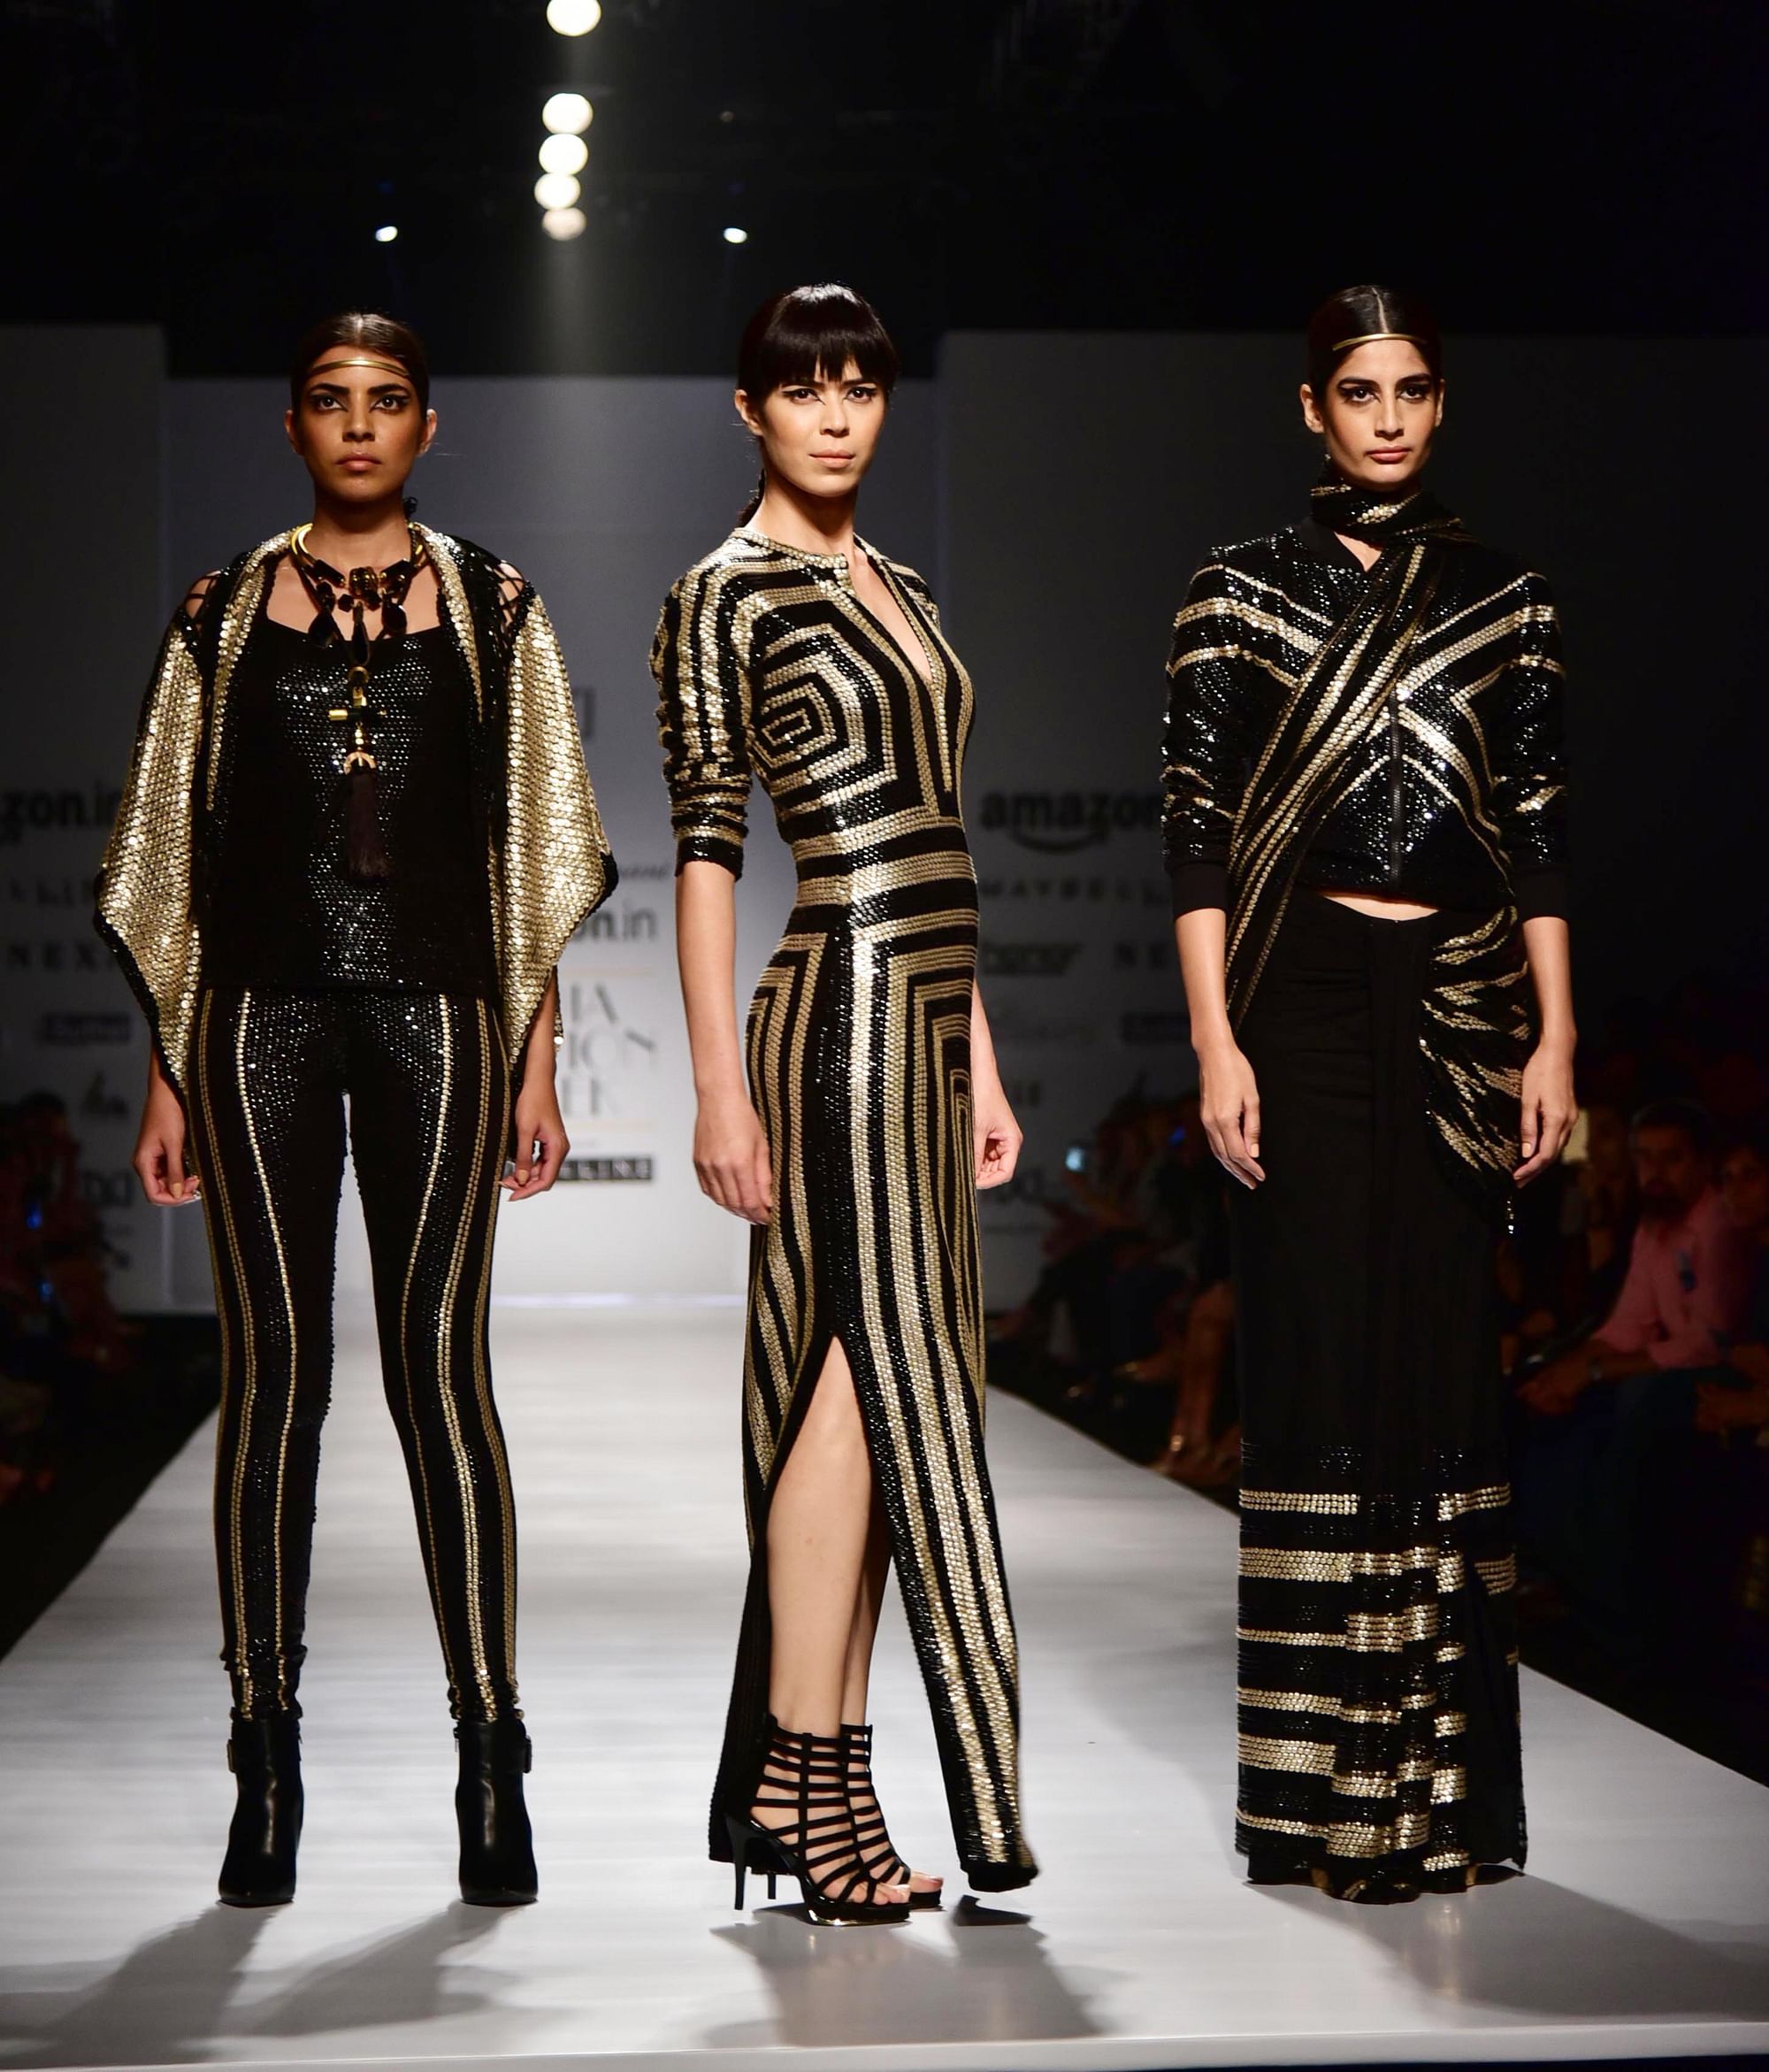 Ritu Kumar, Manish Malhotra, Payal Pratap and others weigh in on the  hottest trends from the FDCI x